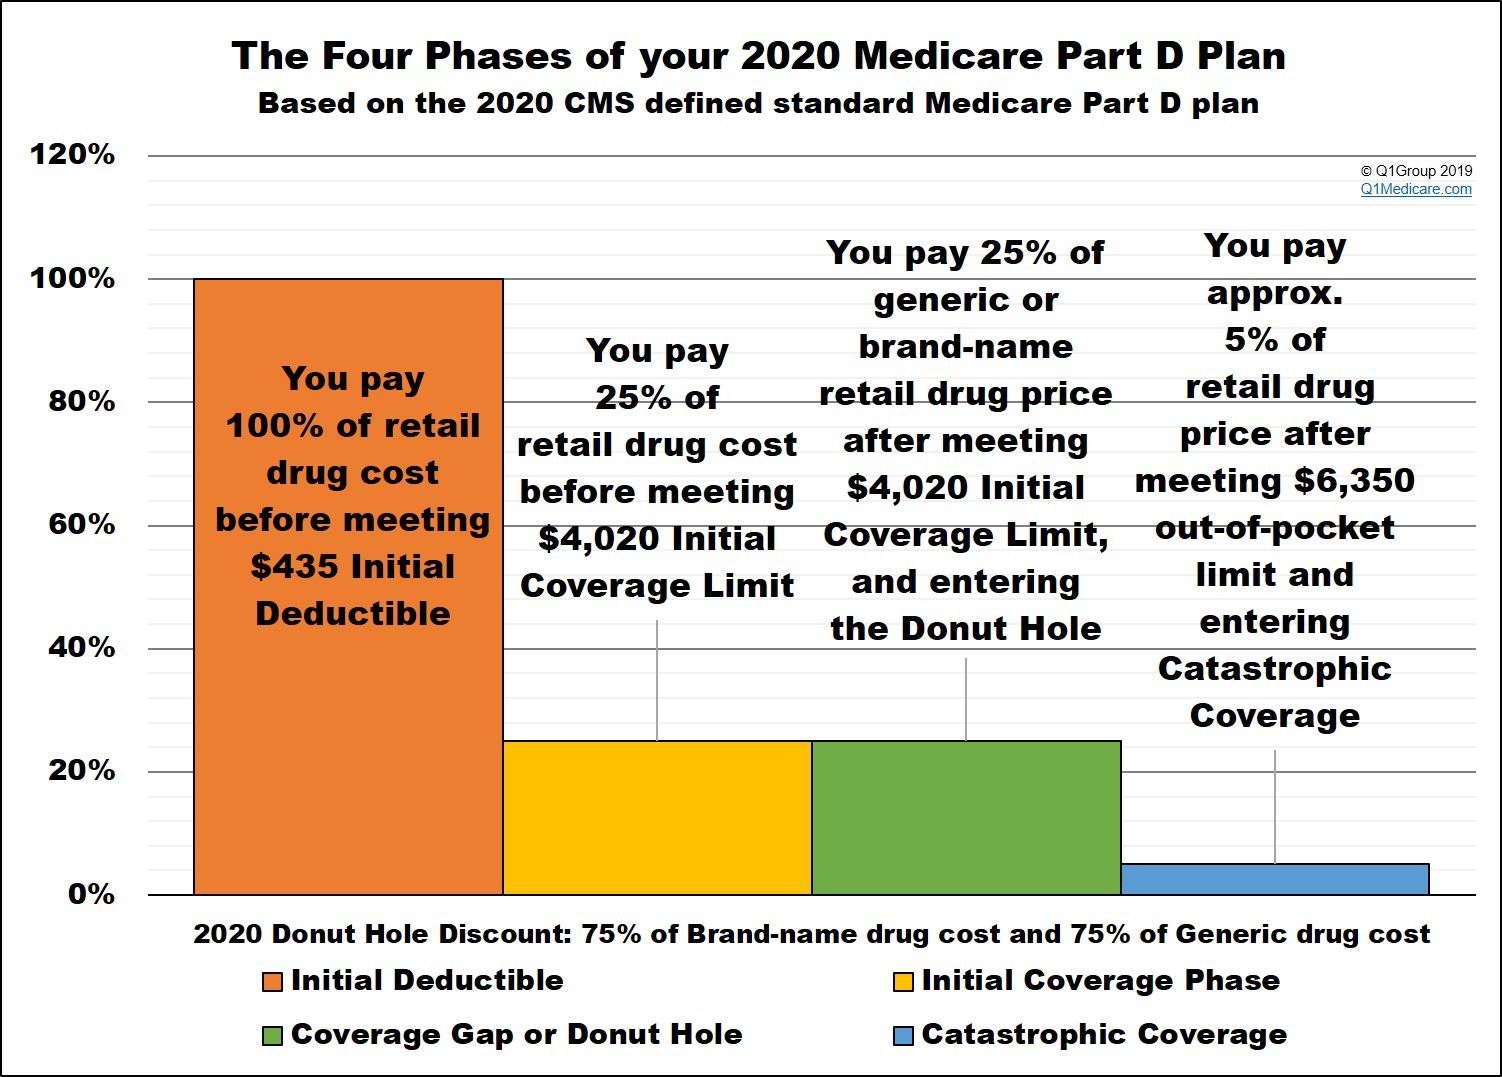 What Is Medicare Part D Catastrophic Coverage?